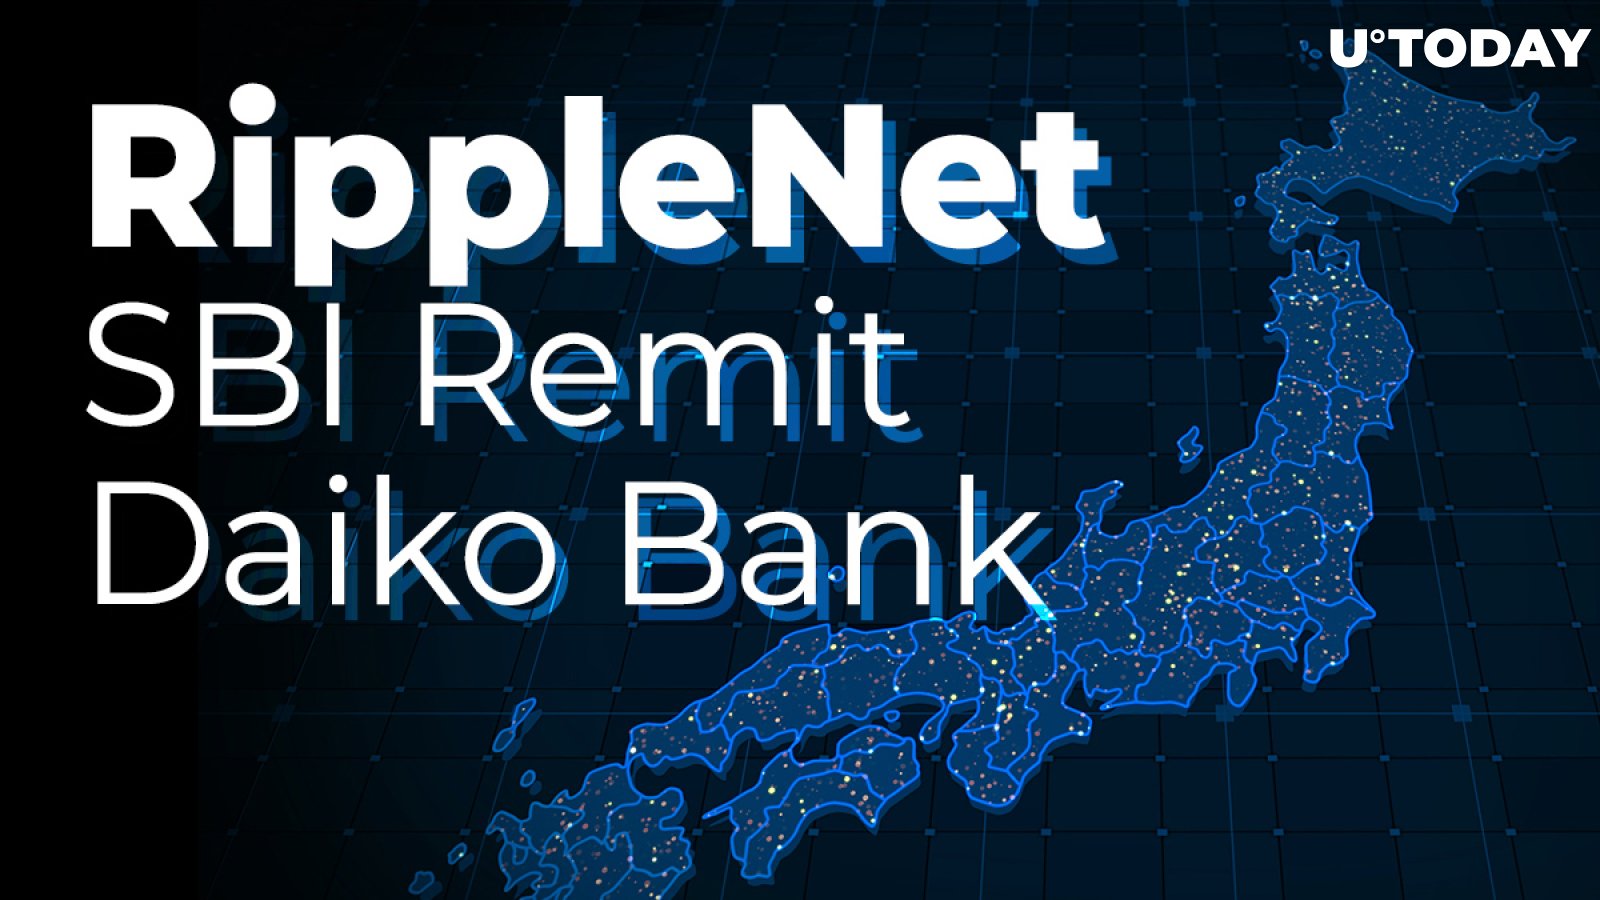 Top RippleNet Member SBI Remit and Daiko Bank to Improve International Payments in Japan